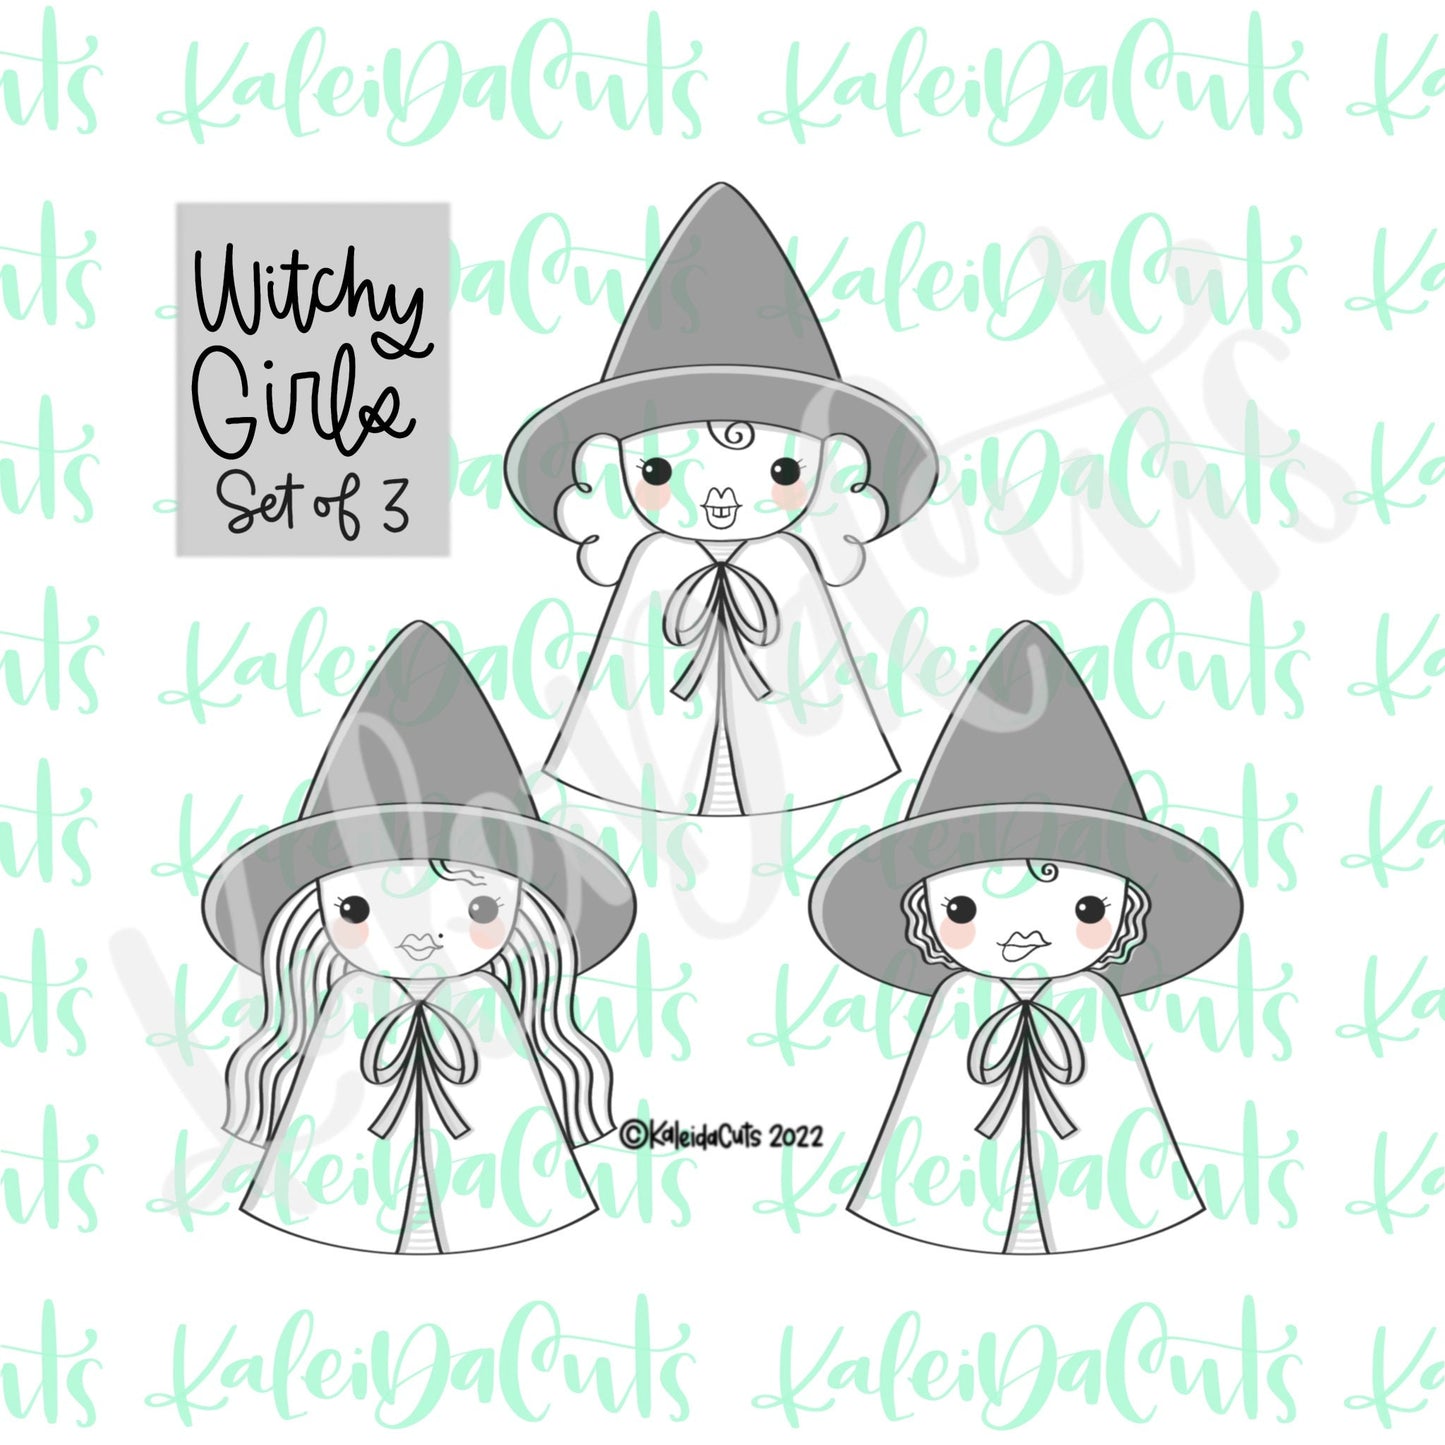 Witchy Girls Set of 3 Cookie Cutters